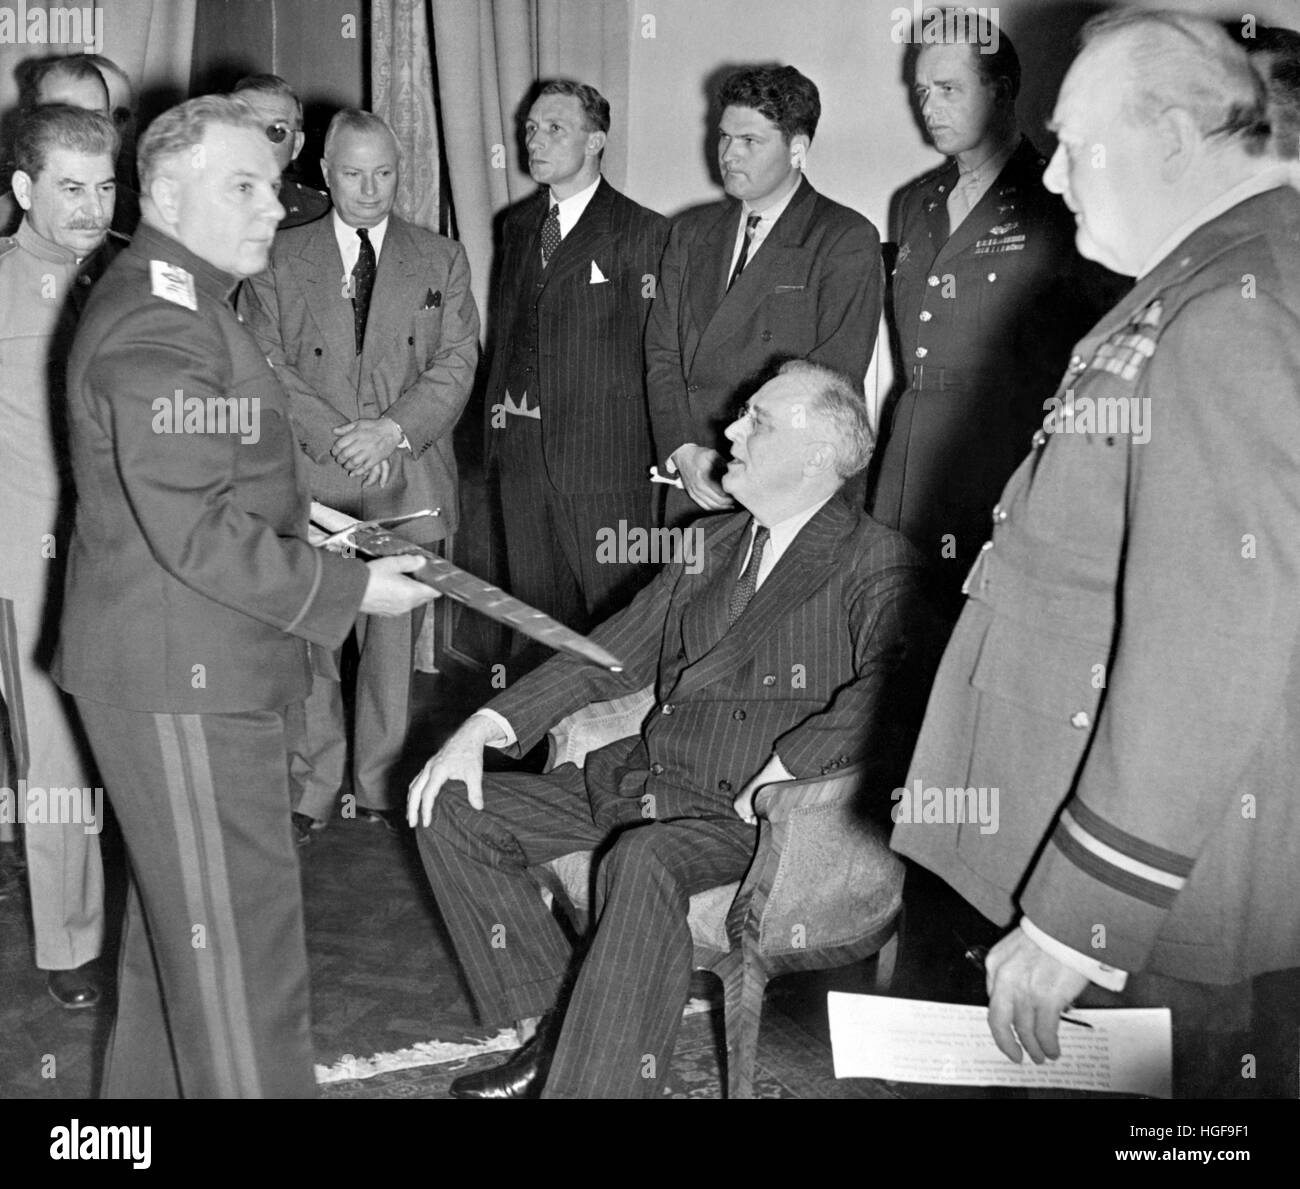 President Roosevelt is presented with the Stalingrad Sword at the Teheran Conference. Churchill and Stalin look on. 29th Nov '43 Stock Photo